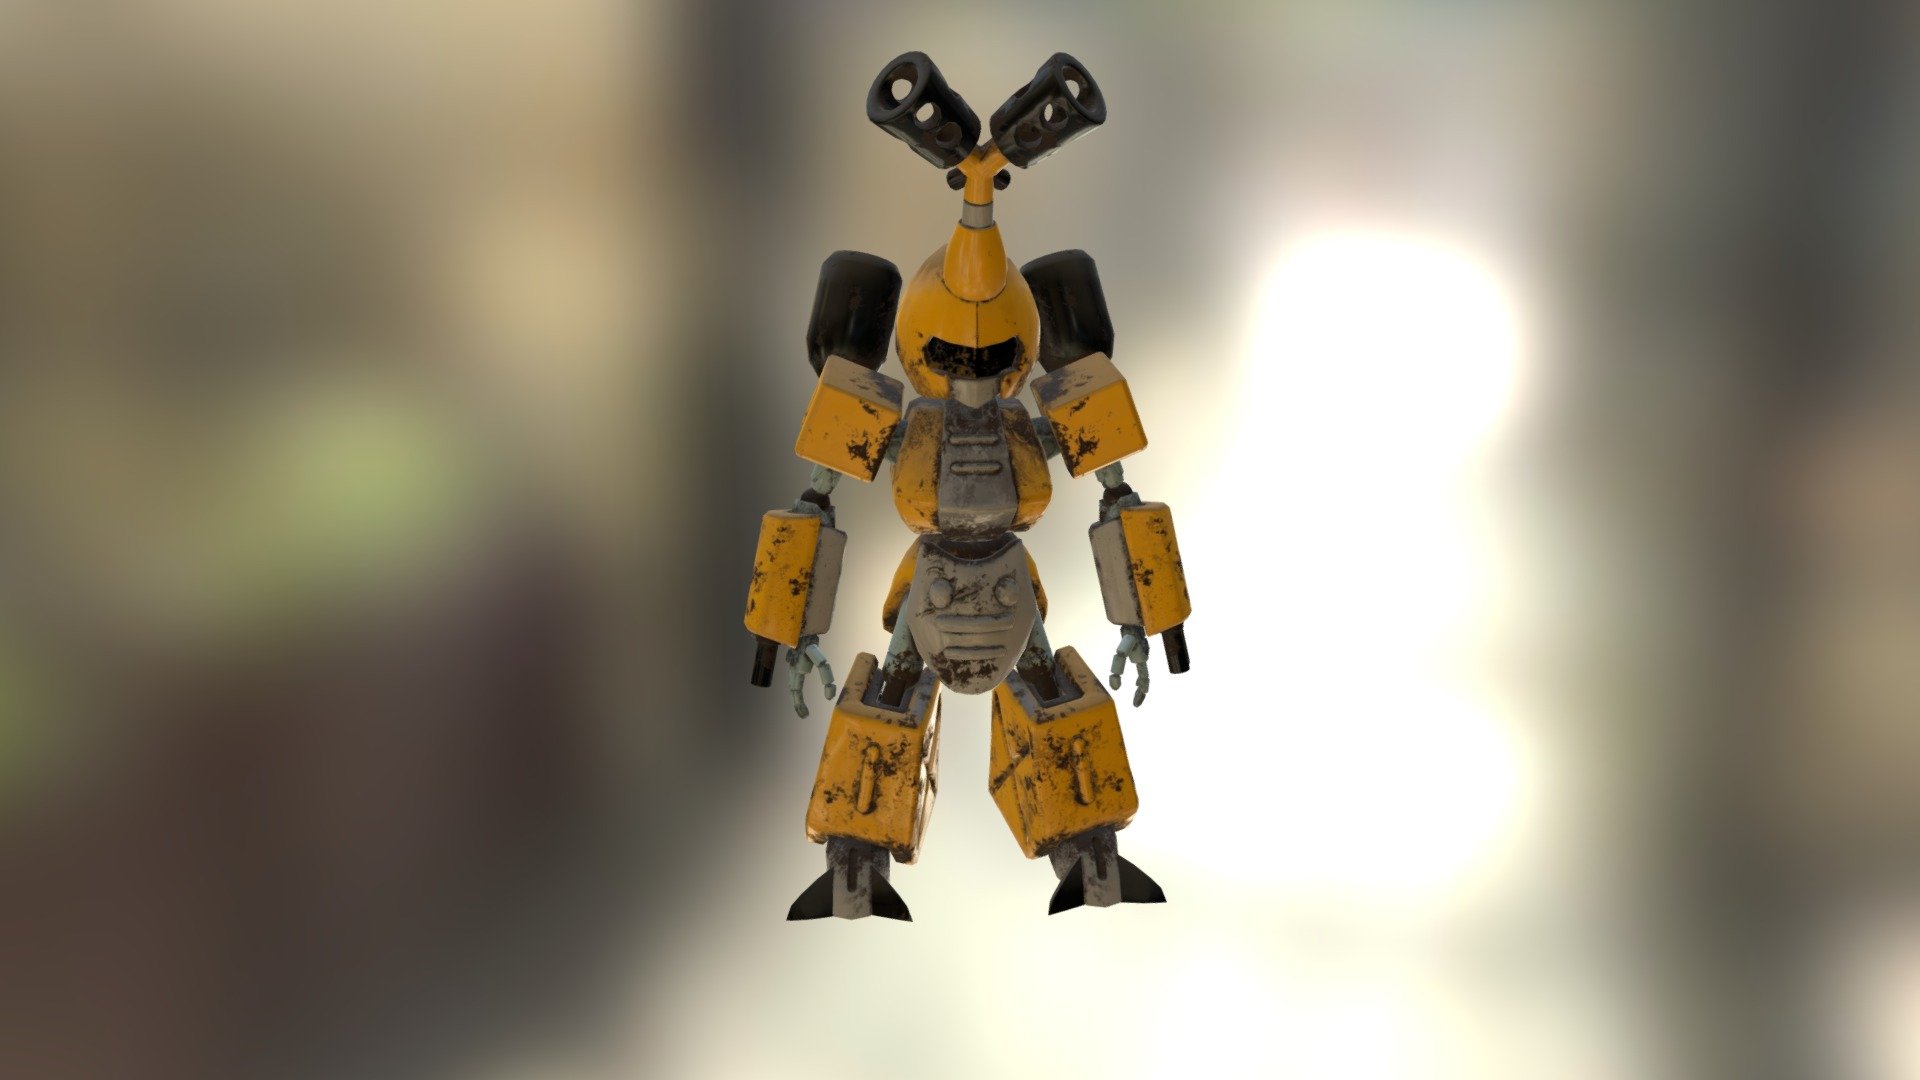 Model and character design are not owned by me.

Model and author (pasco295) can be found at https://share.allegorithmic.com/libraries/608

A rust and non-functional metabee 3d model